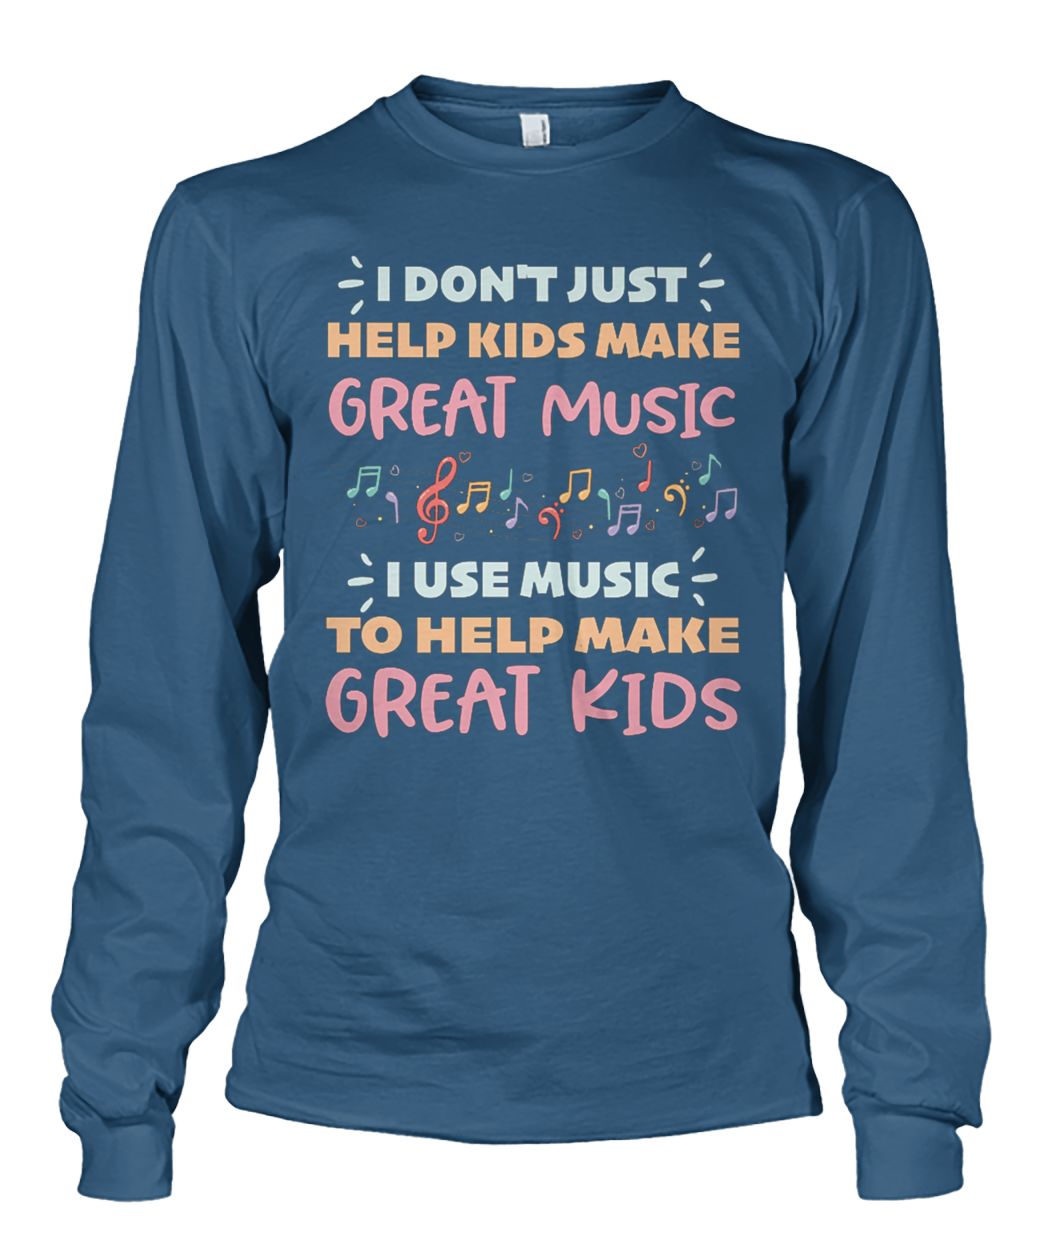 I don't just help kids make great music unisex long sleeve